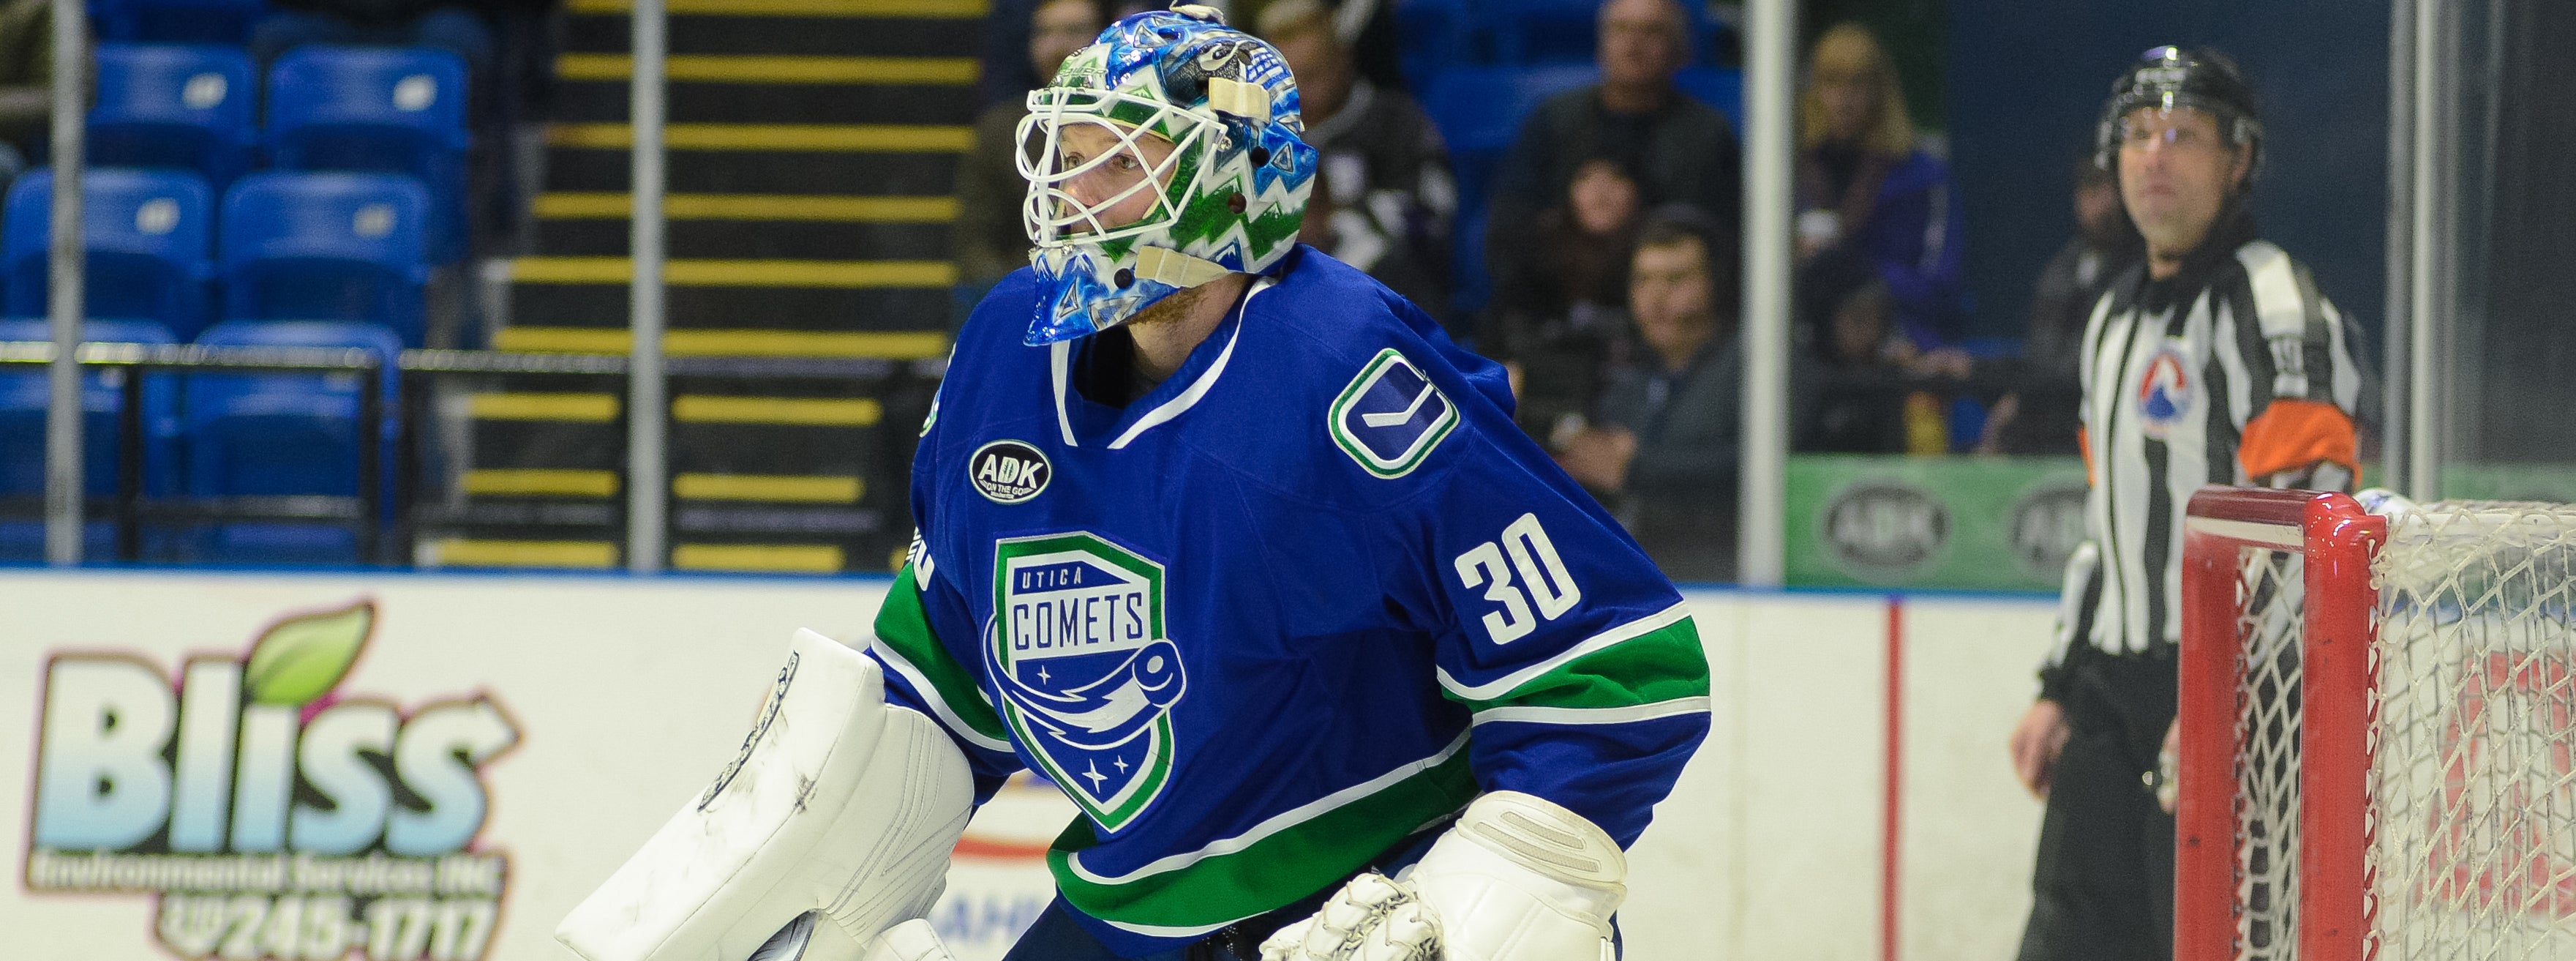 CANUCKS RECALL DEMKO FROM THE COMETS